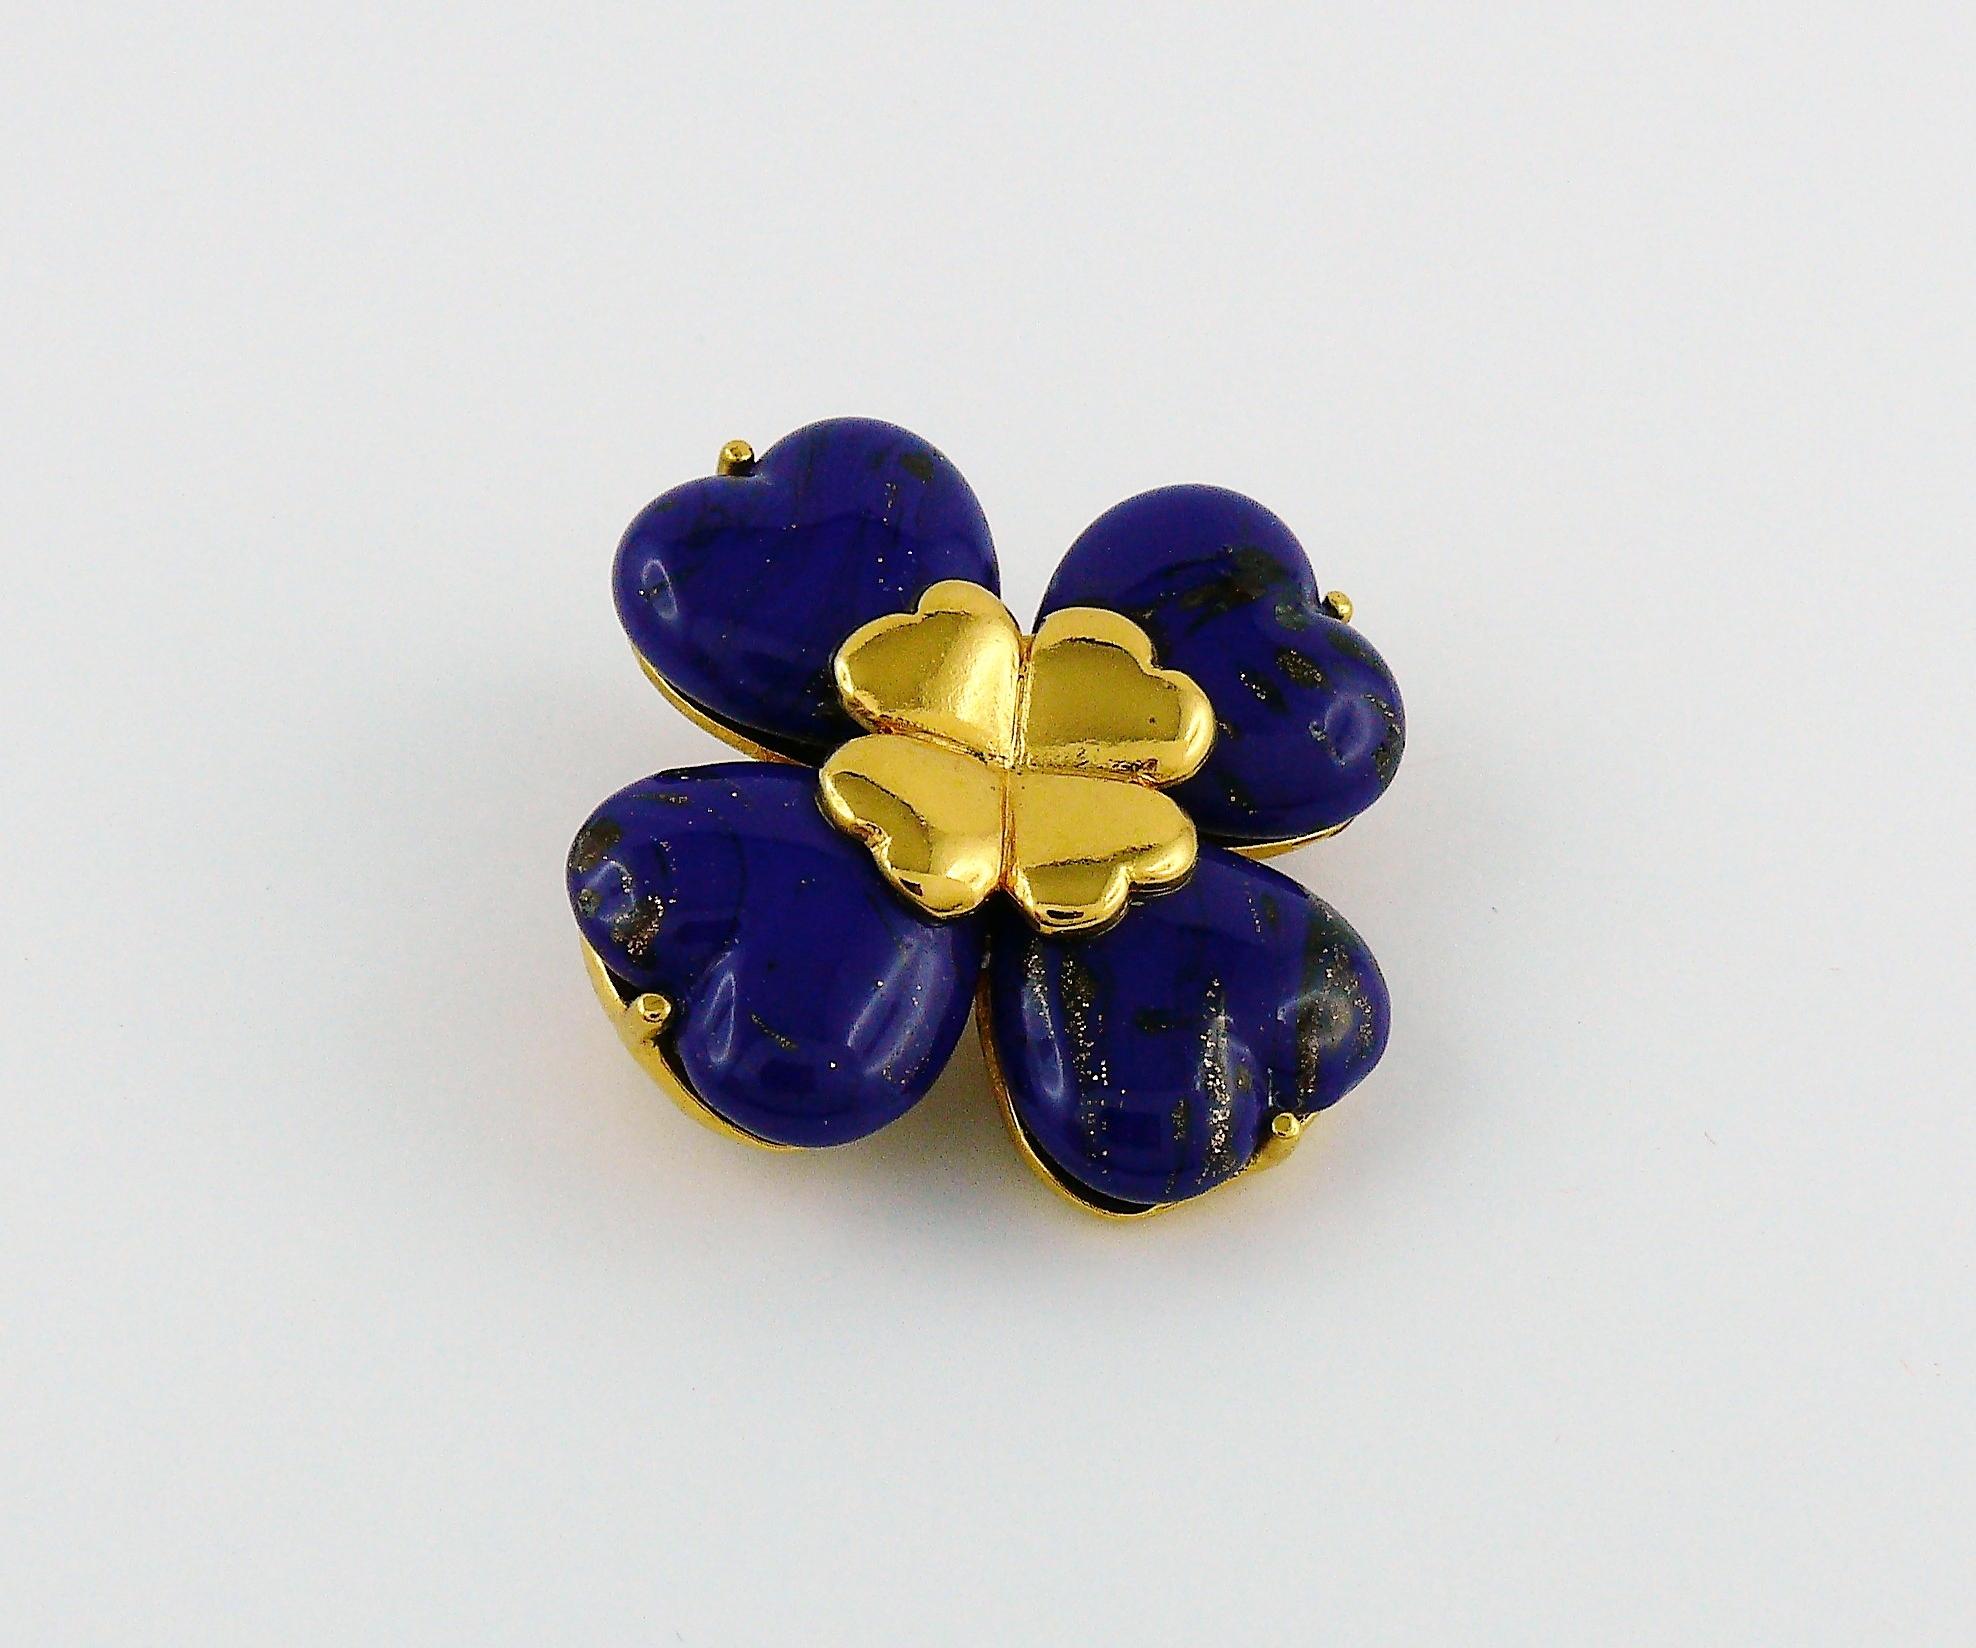 YVES SAINT LAURENT vintage gold toned clover brooch featuring heart shaped faux lapis lazuli glass cabochons.

Can be worn as a pendant.

Embossed YSL Made in France.

Indicative measurements : approx. 3.7 cm x 3.7 cm (1.46 inches x 1.46